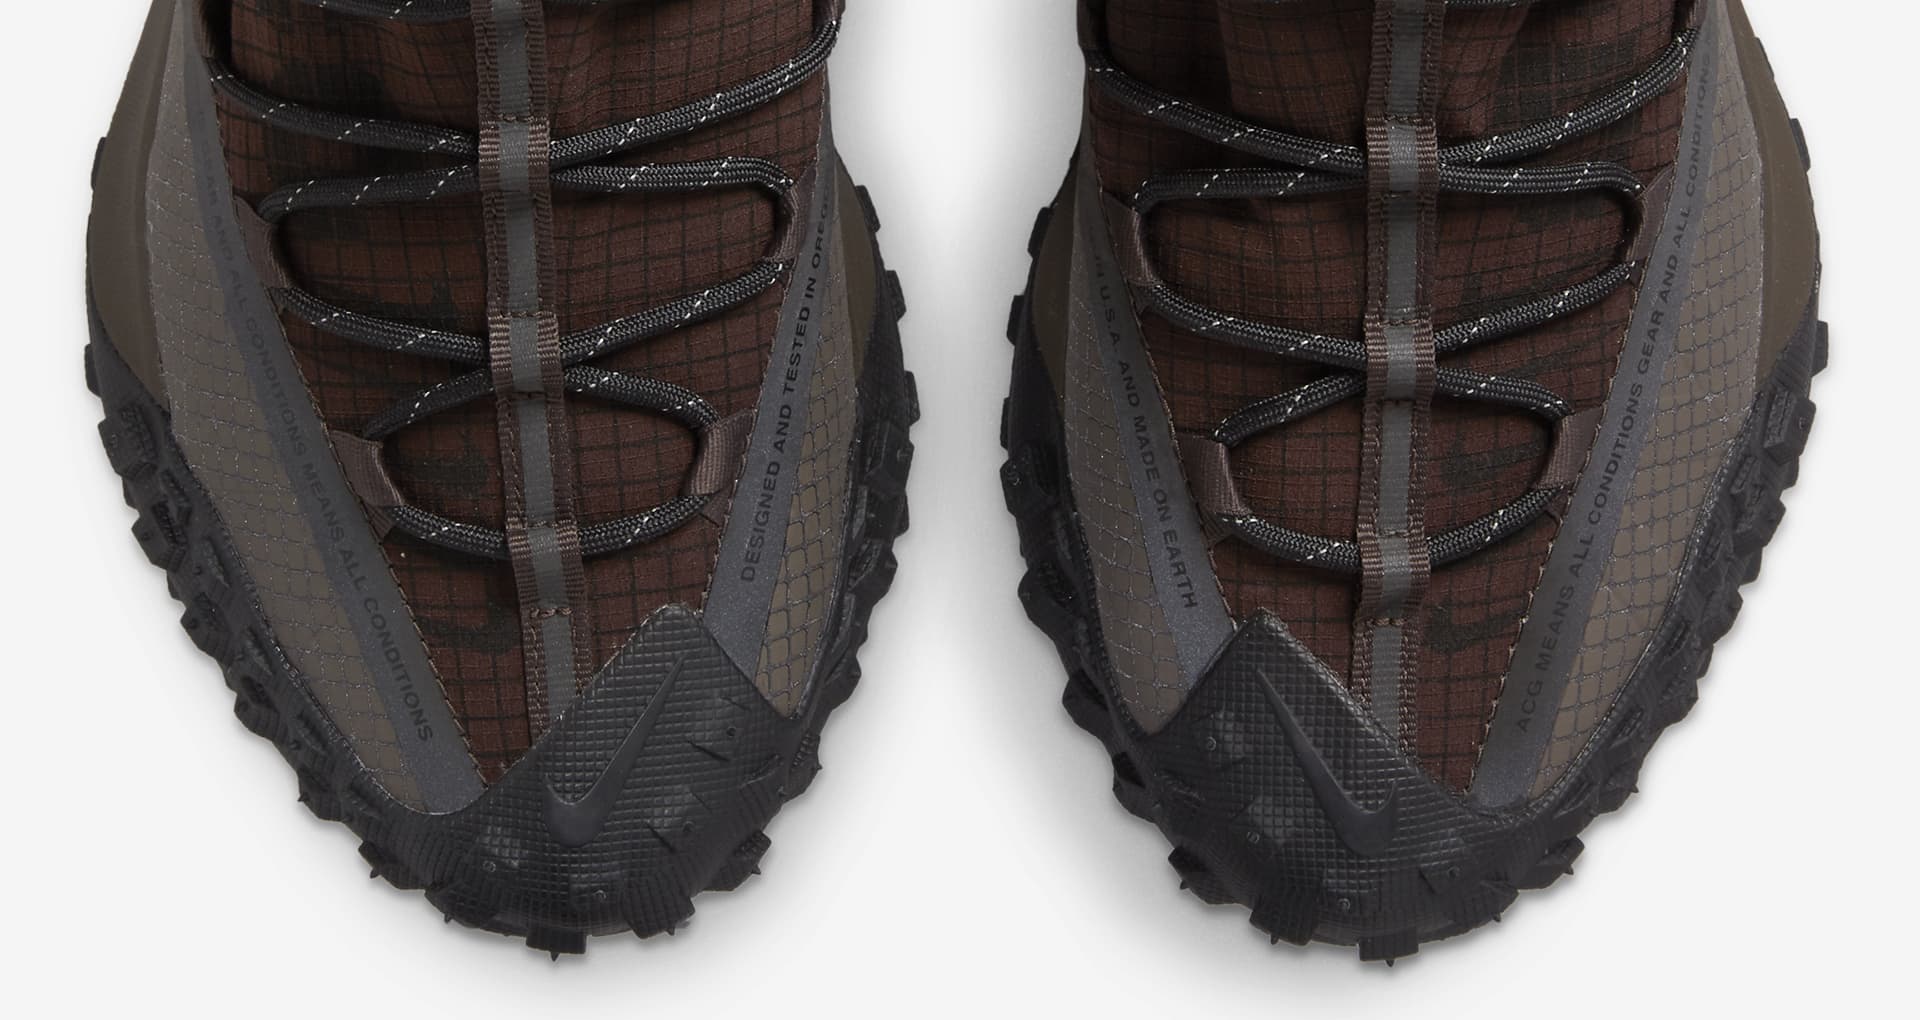 ACG Mountain Fly Low 'Brown Basalt' Release Date. Nike SNKRS SG